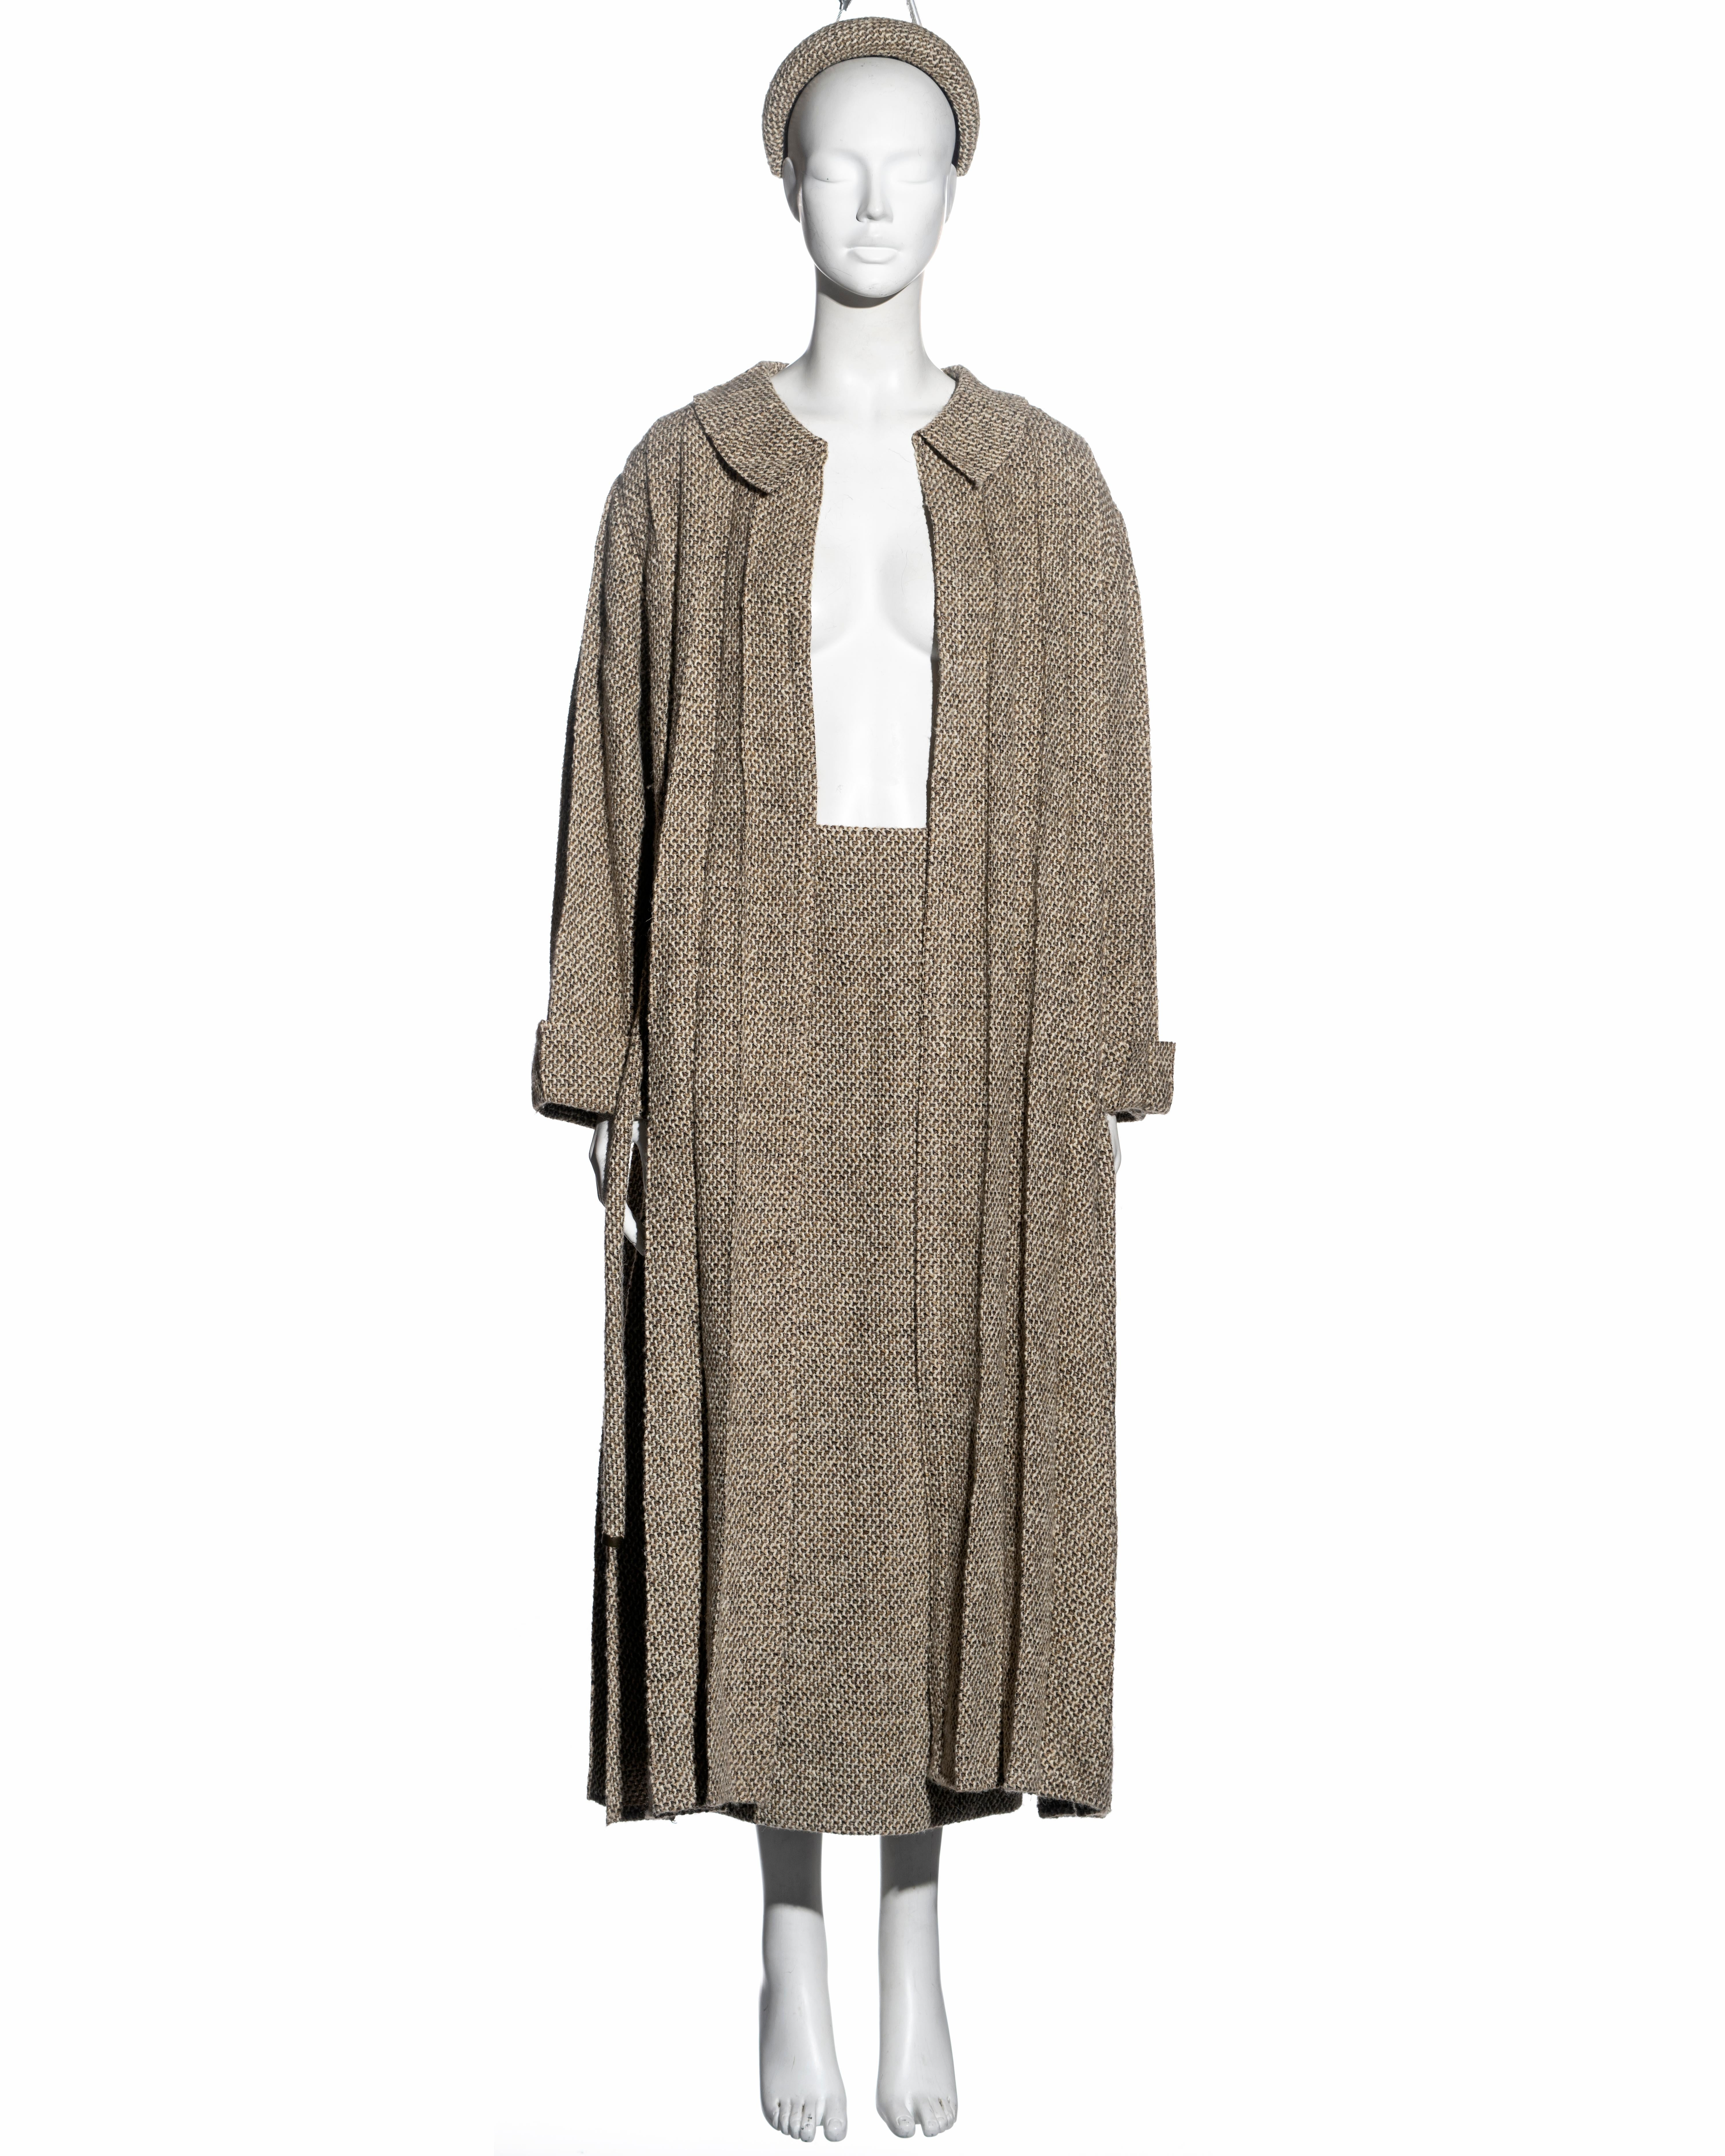 Chanel by Karl Lagerfeld brown tweed pleated coat, skirt and hat set, fw 1998 For Sale 5